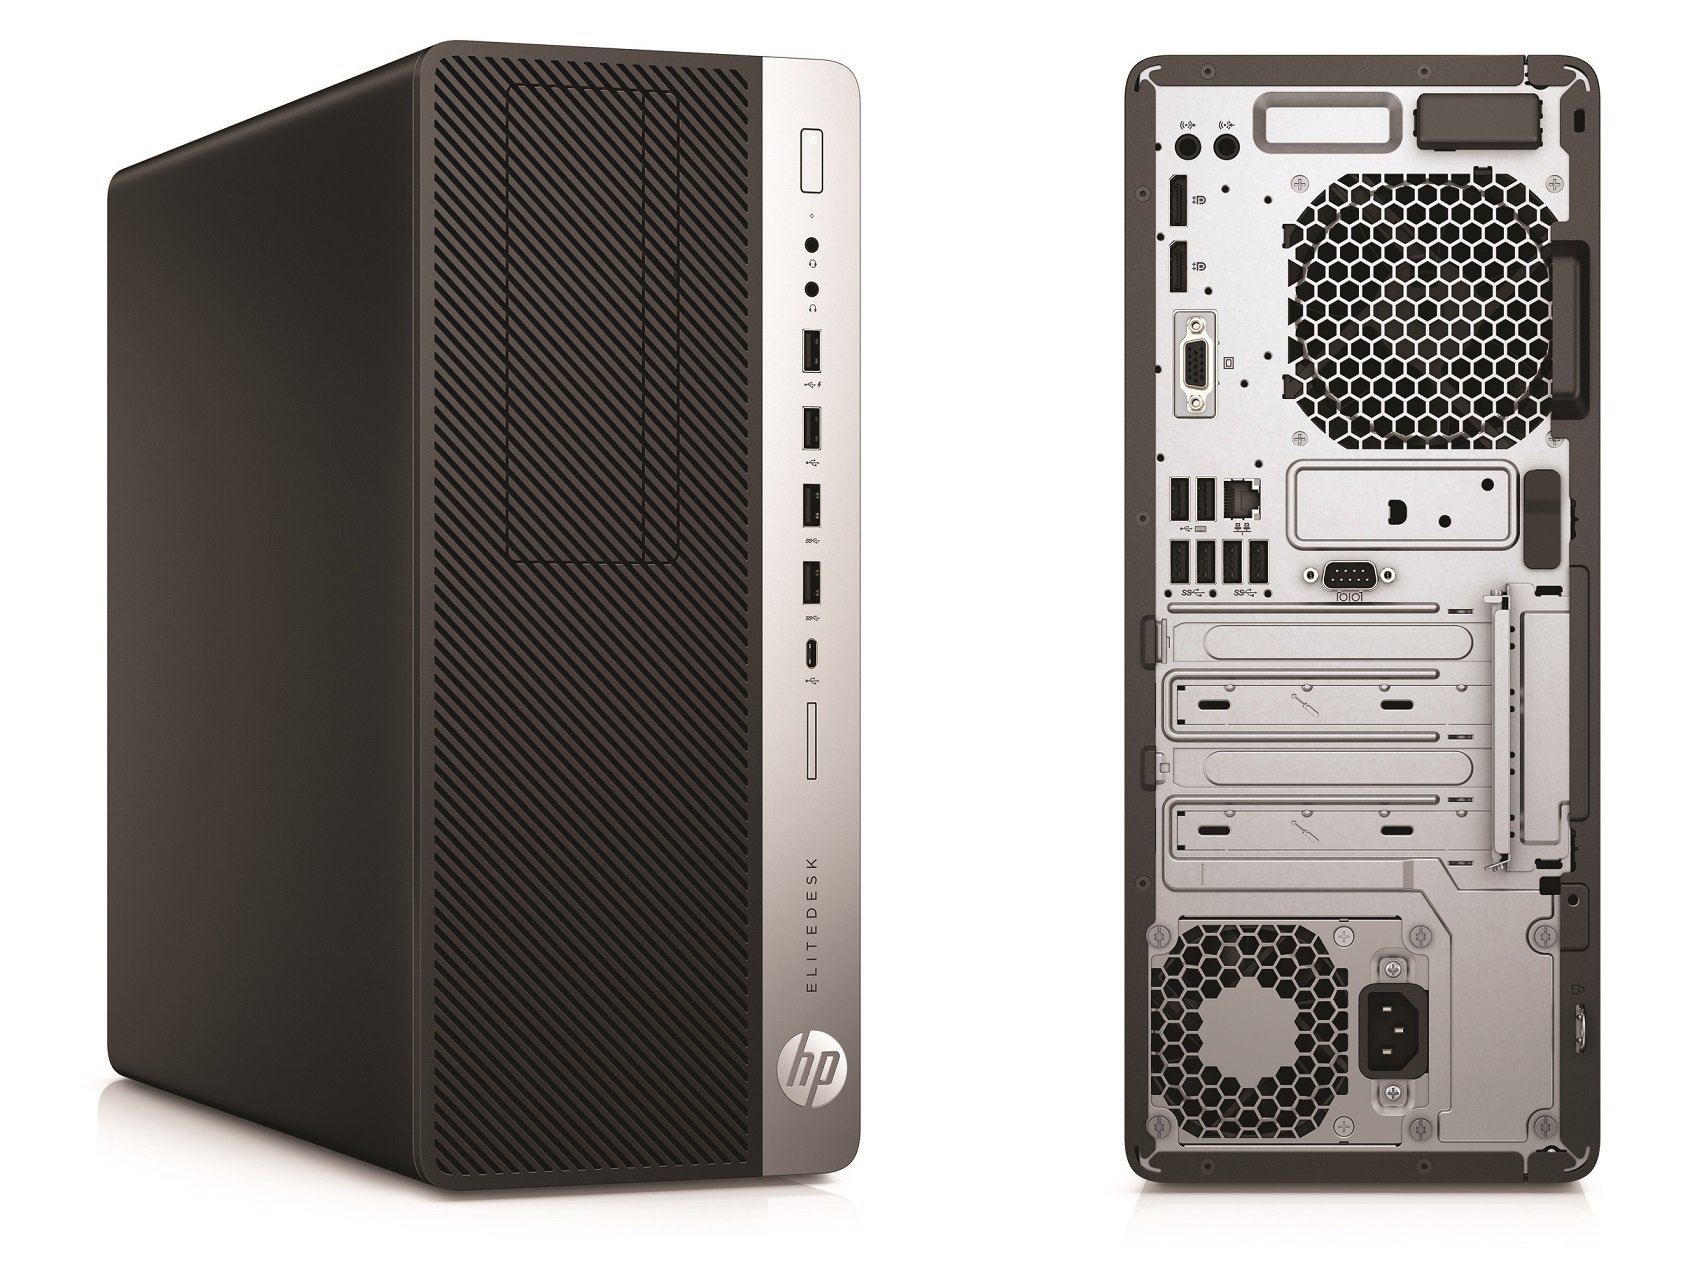 Hp Elitedesk 800 G3 Is A Business Pc That Packs A Nvidia Gtx 1080 Windows Central